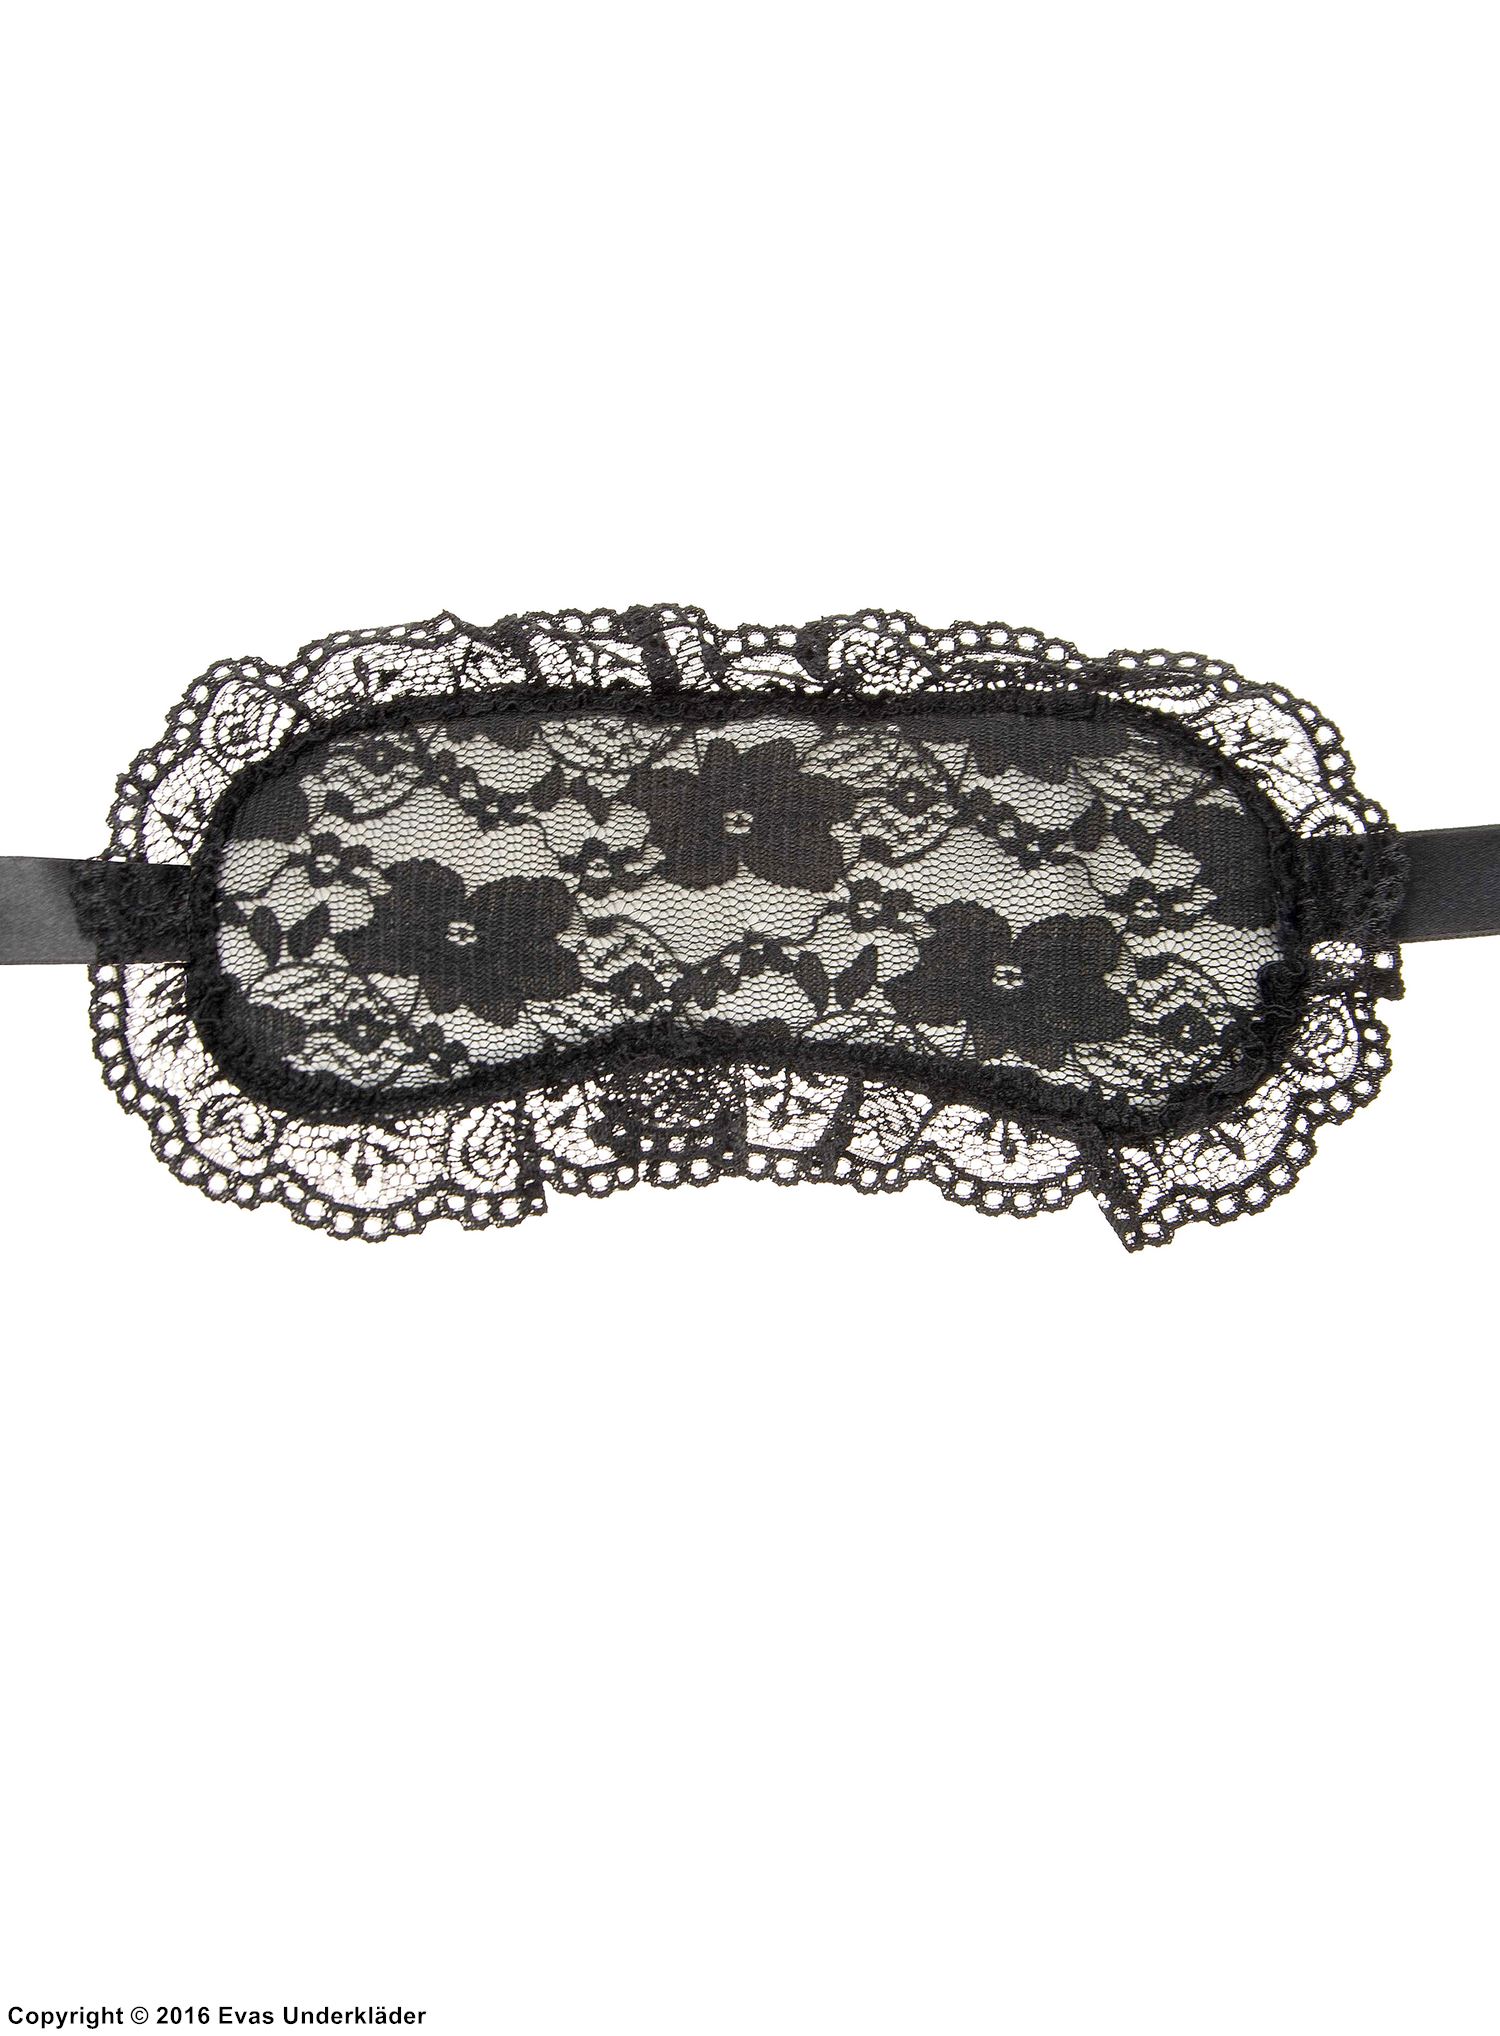 Sleep mask, ruffles, floral lace